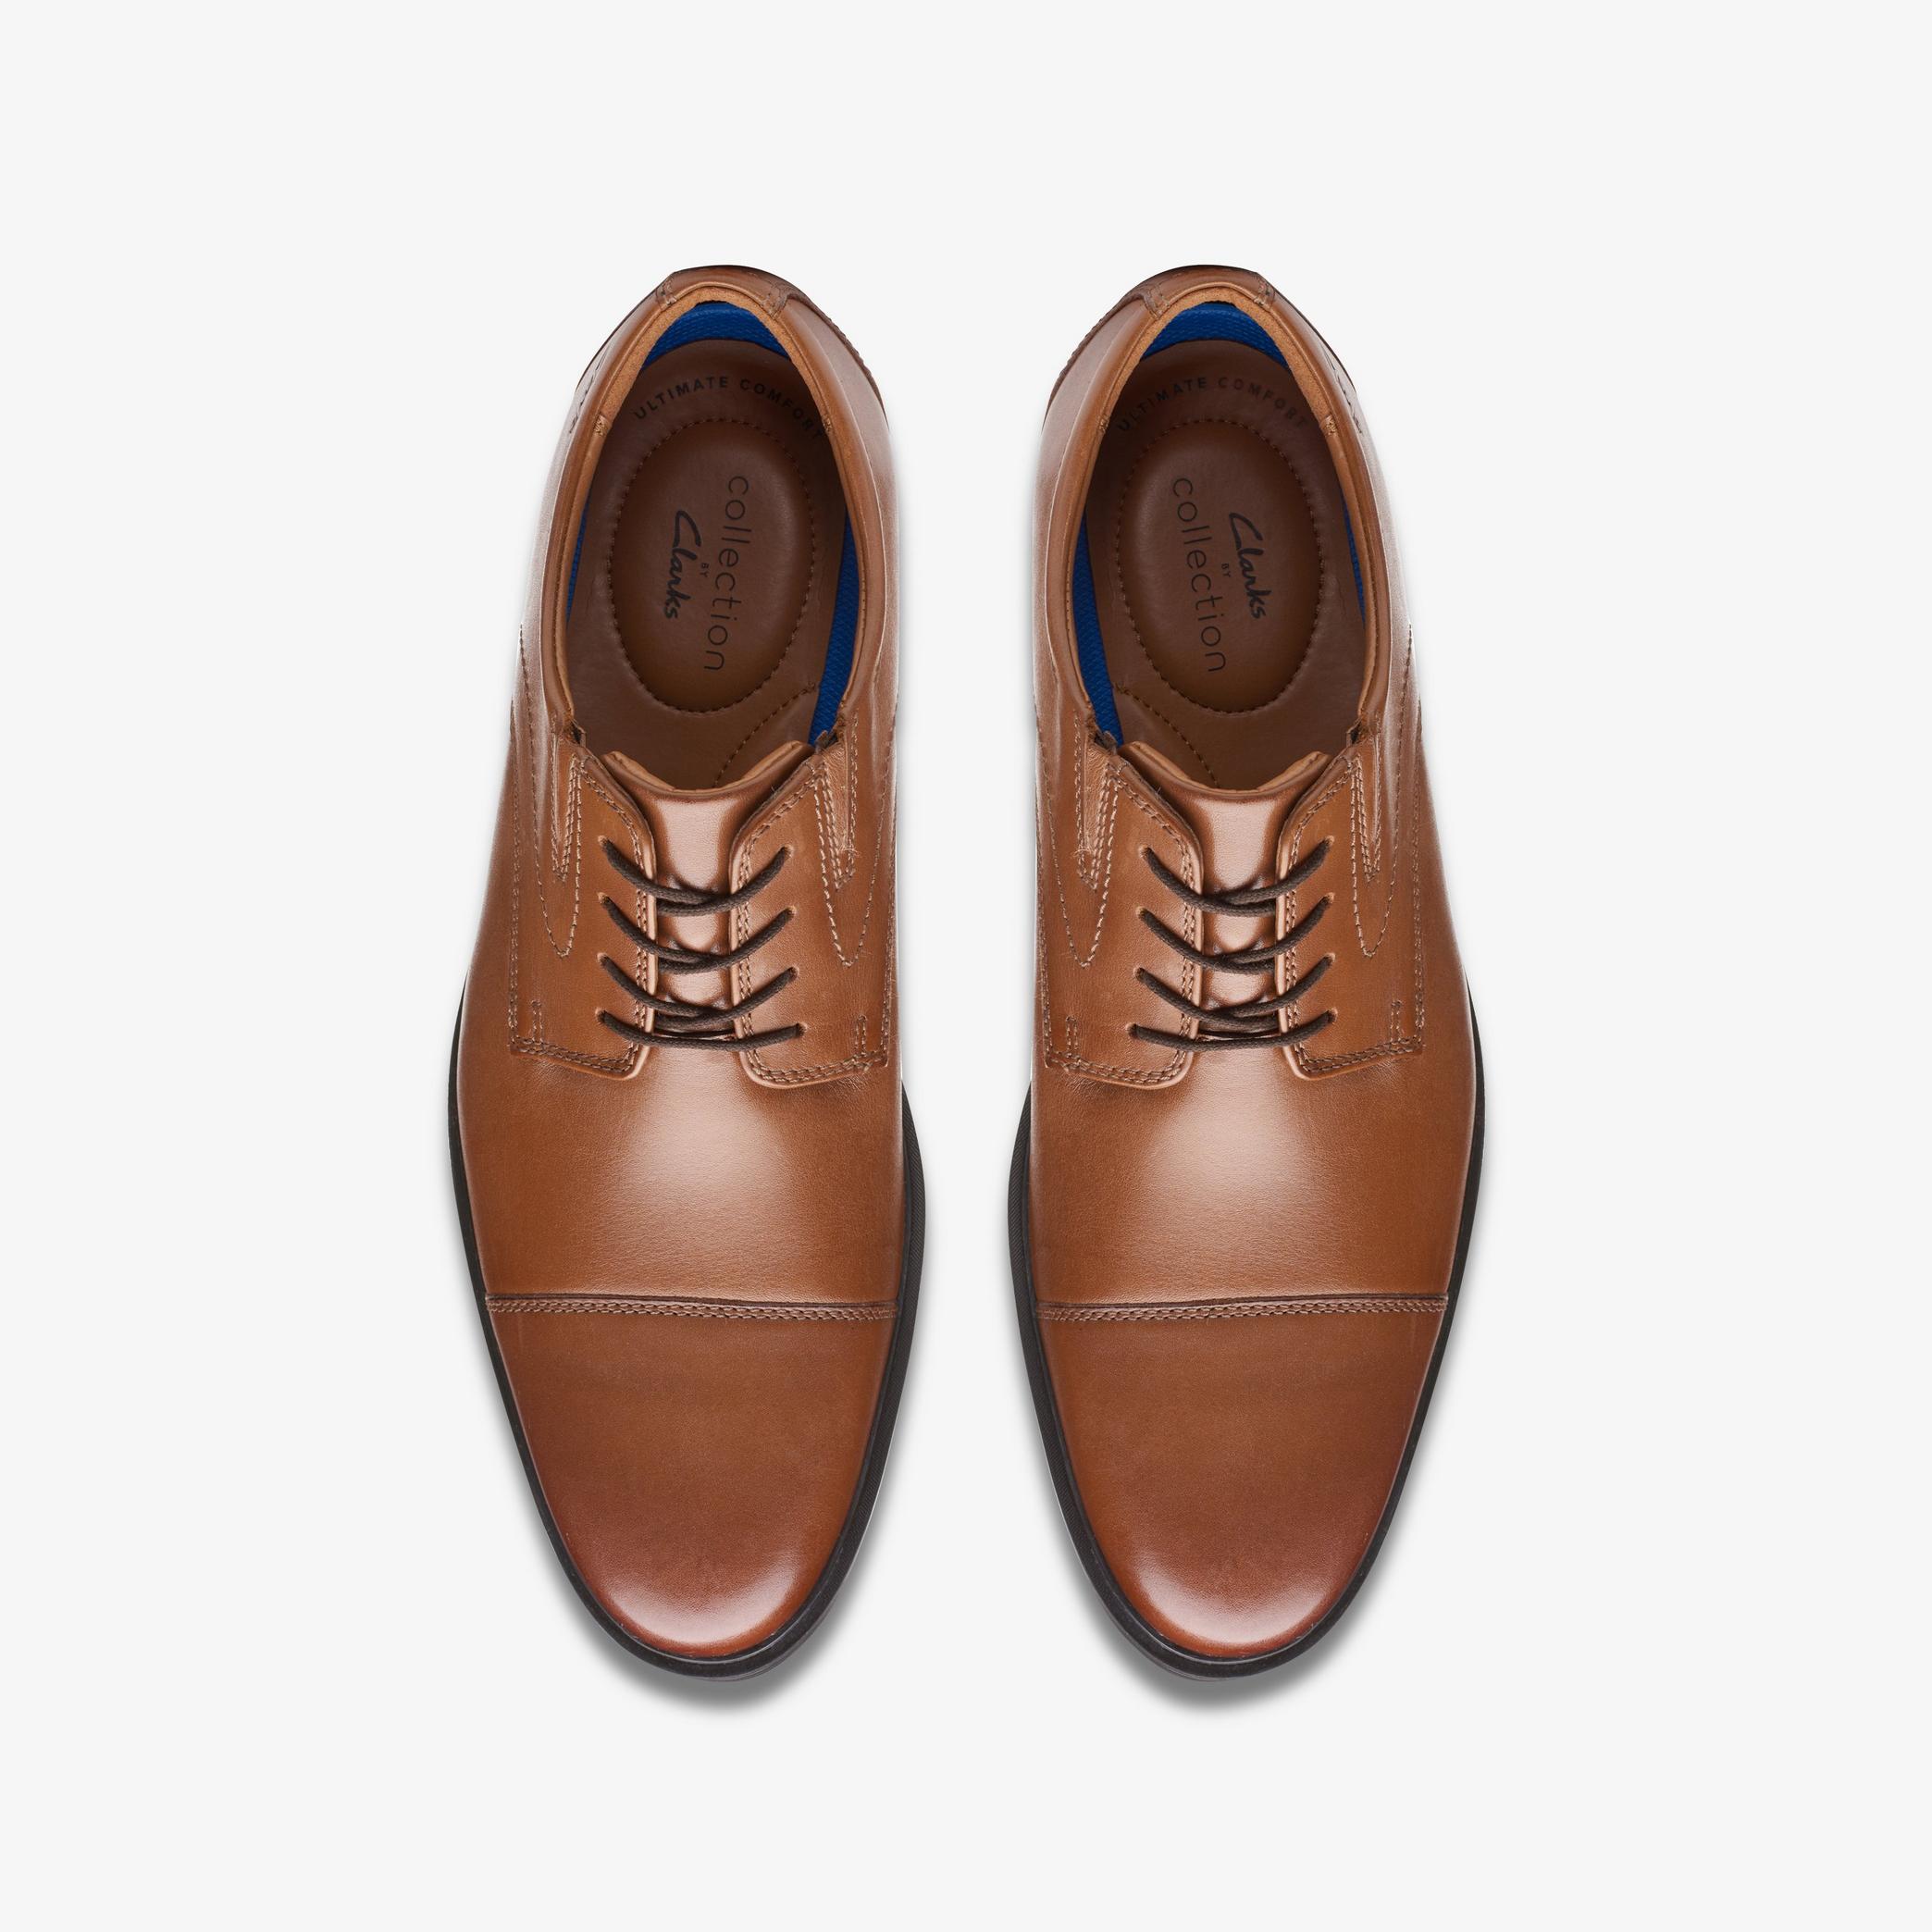 Whiddon Cap Dark Tan Leather Oxford Shoes, view 6 of 6